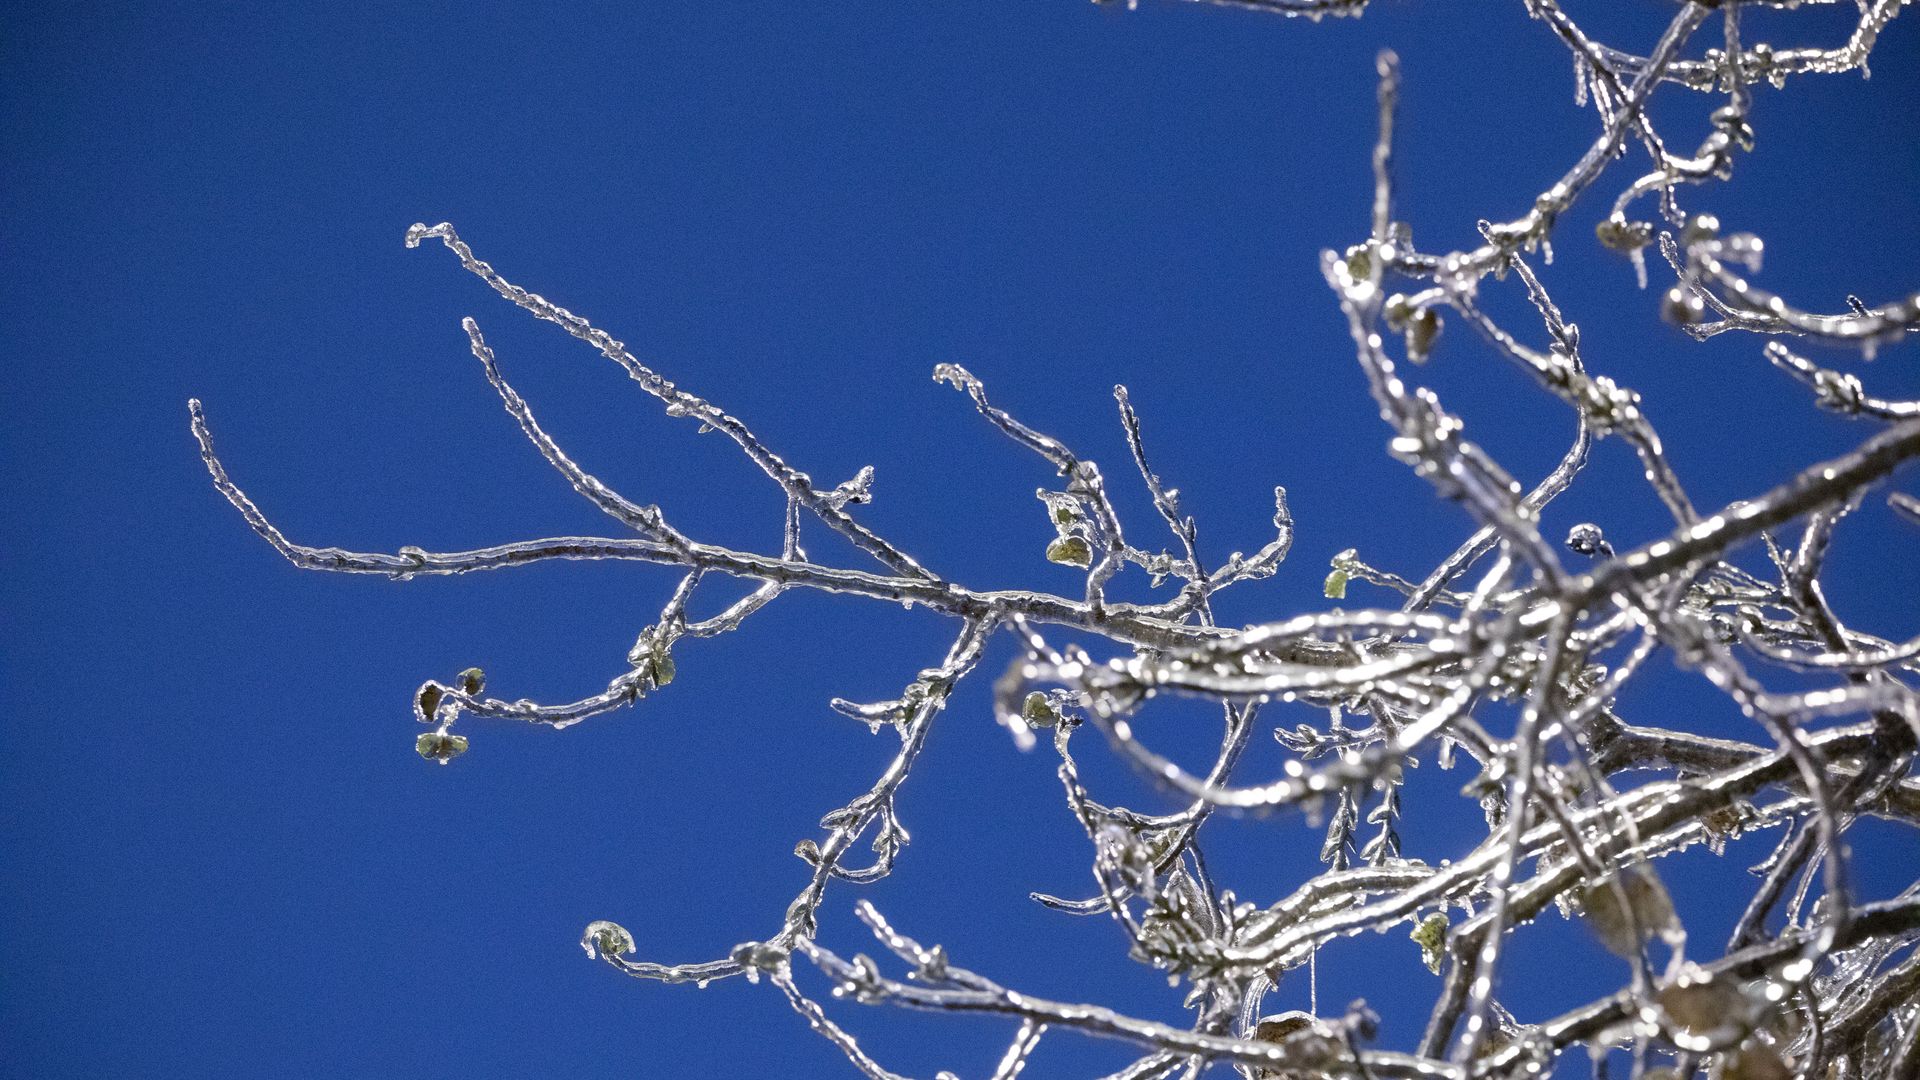 An iced over branch hangs in the air.